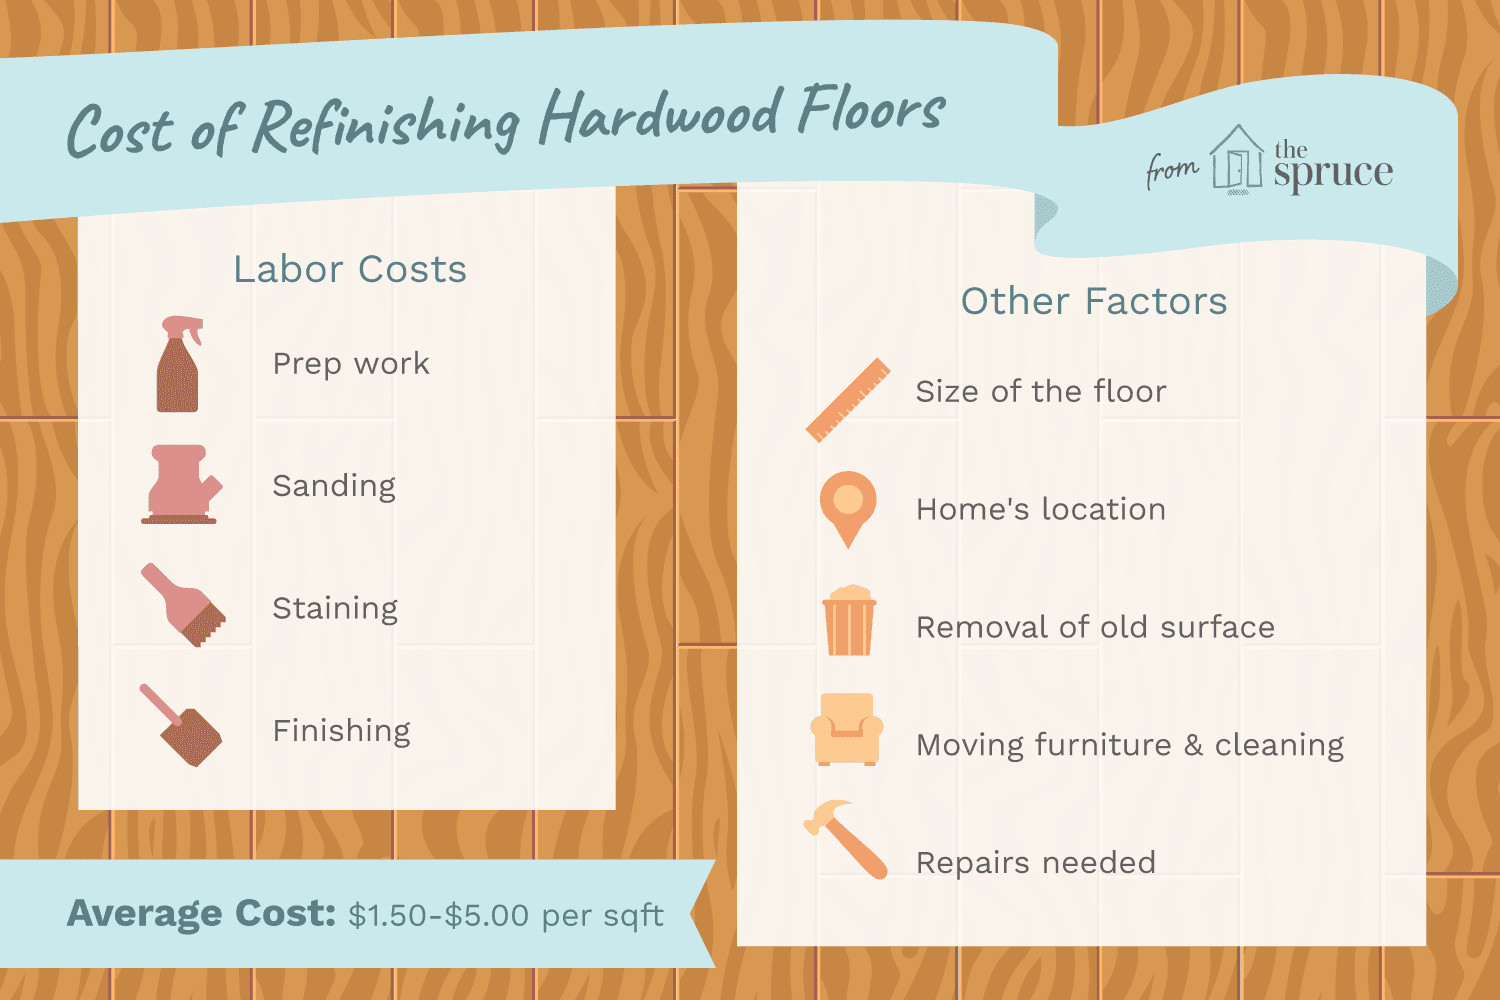 hardwood flooring bc canada of the cost to refinish hardwood floors regarding cost to refinish hardwood floors 1314853 final 5bb6259346e0fb0026825ce2